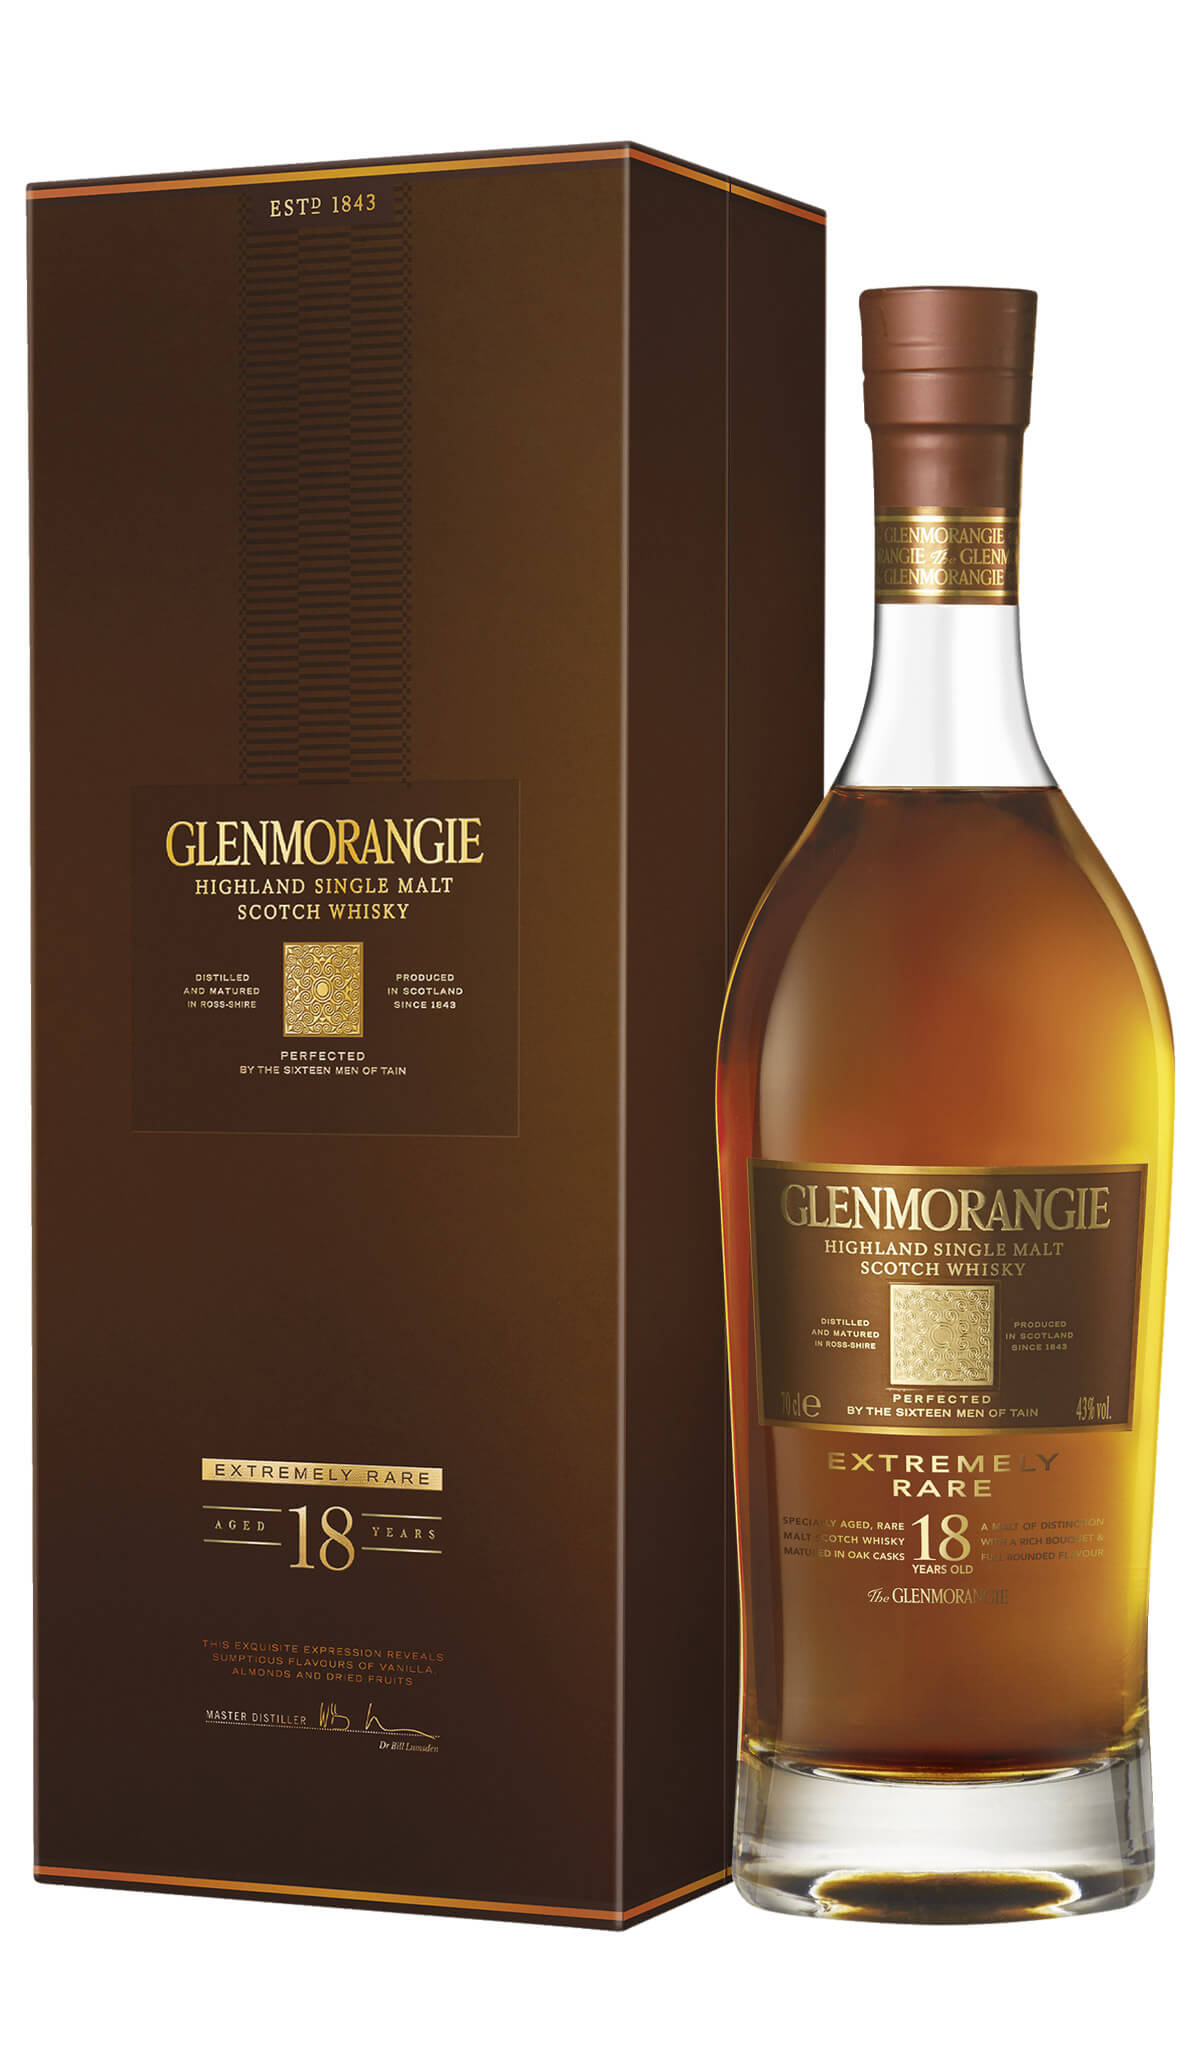 Find out more or buy Glenmorangie Extremely Rare 18 Year Old Single Malt Scotch Whisky (700ml) online at Wine Sellers Direct - Australia’s independent liquor specialists.